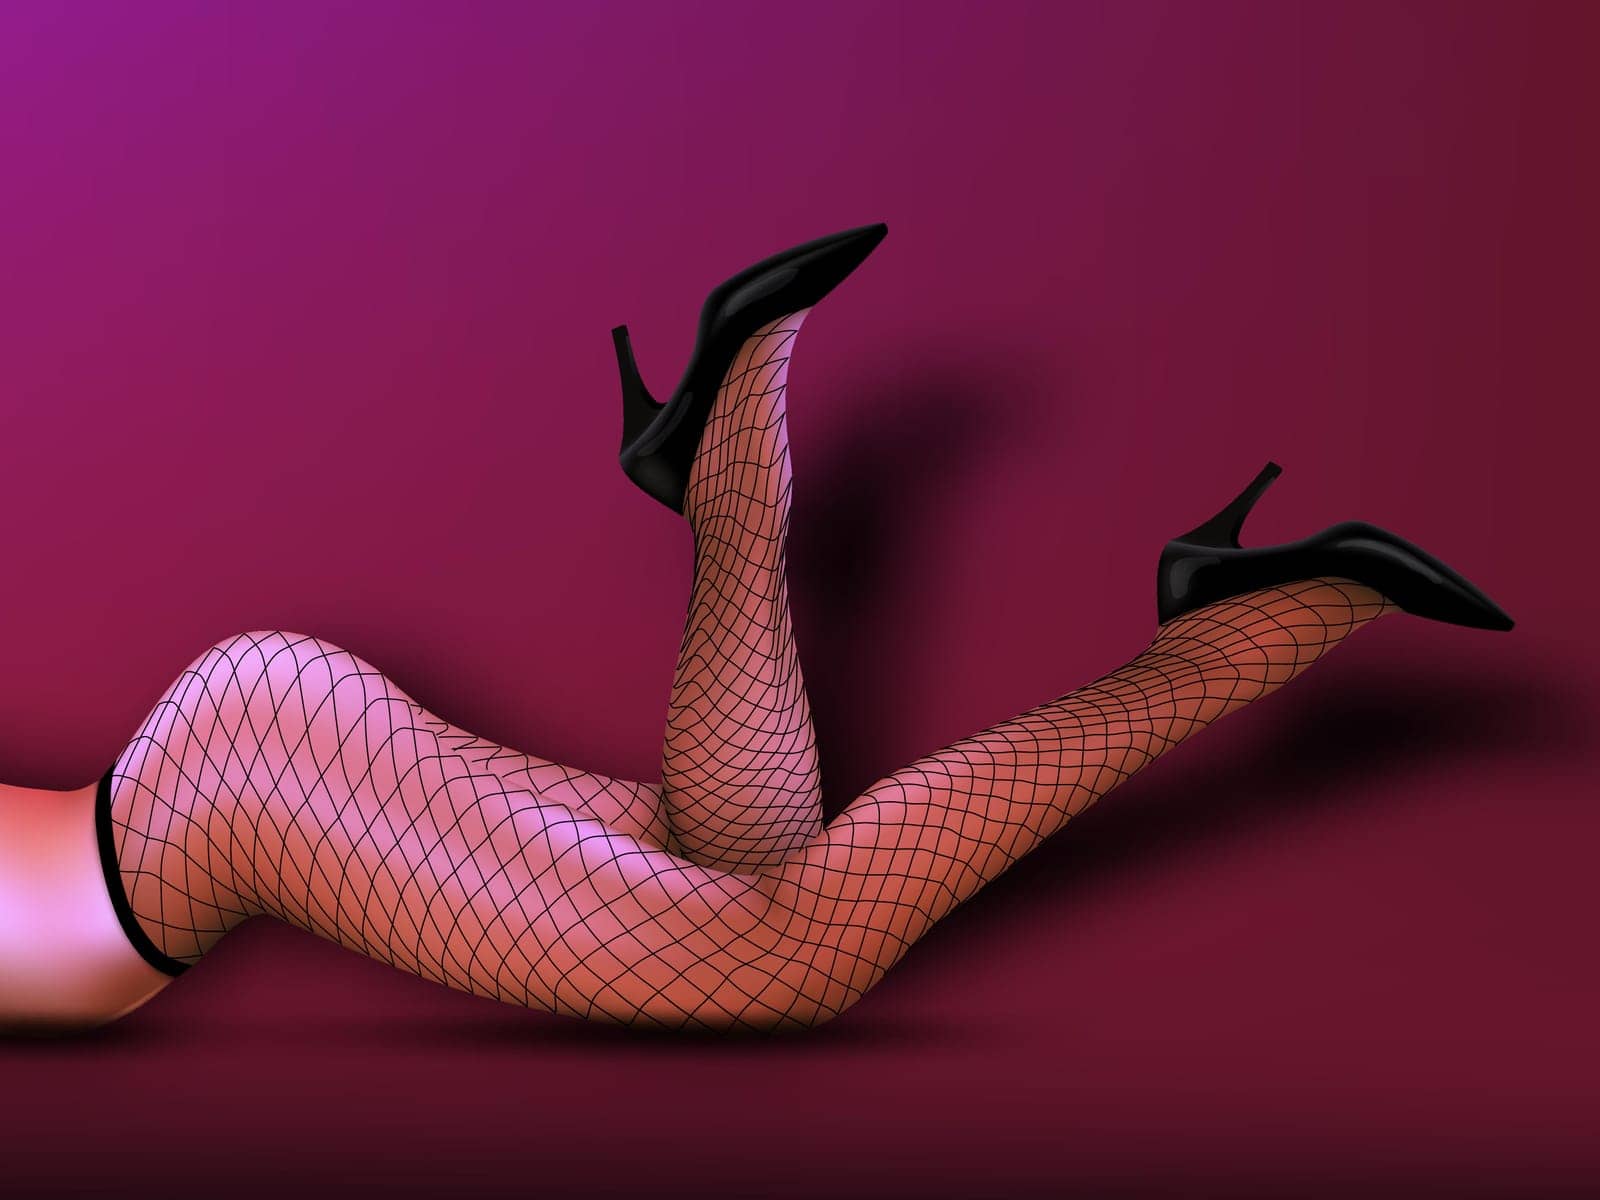 Realistic Female Legs In Fishnet Stockings On Red by VectorThings